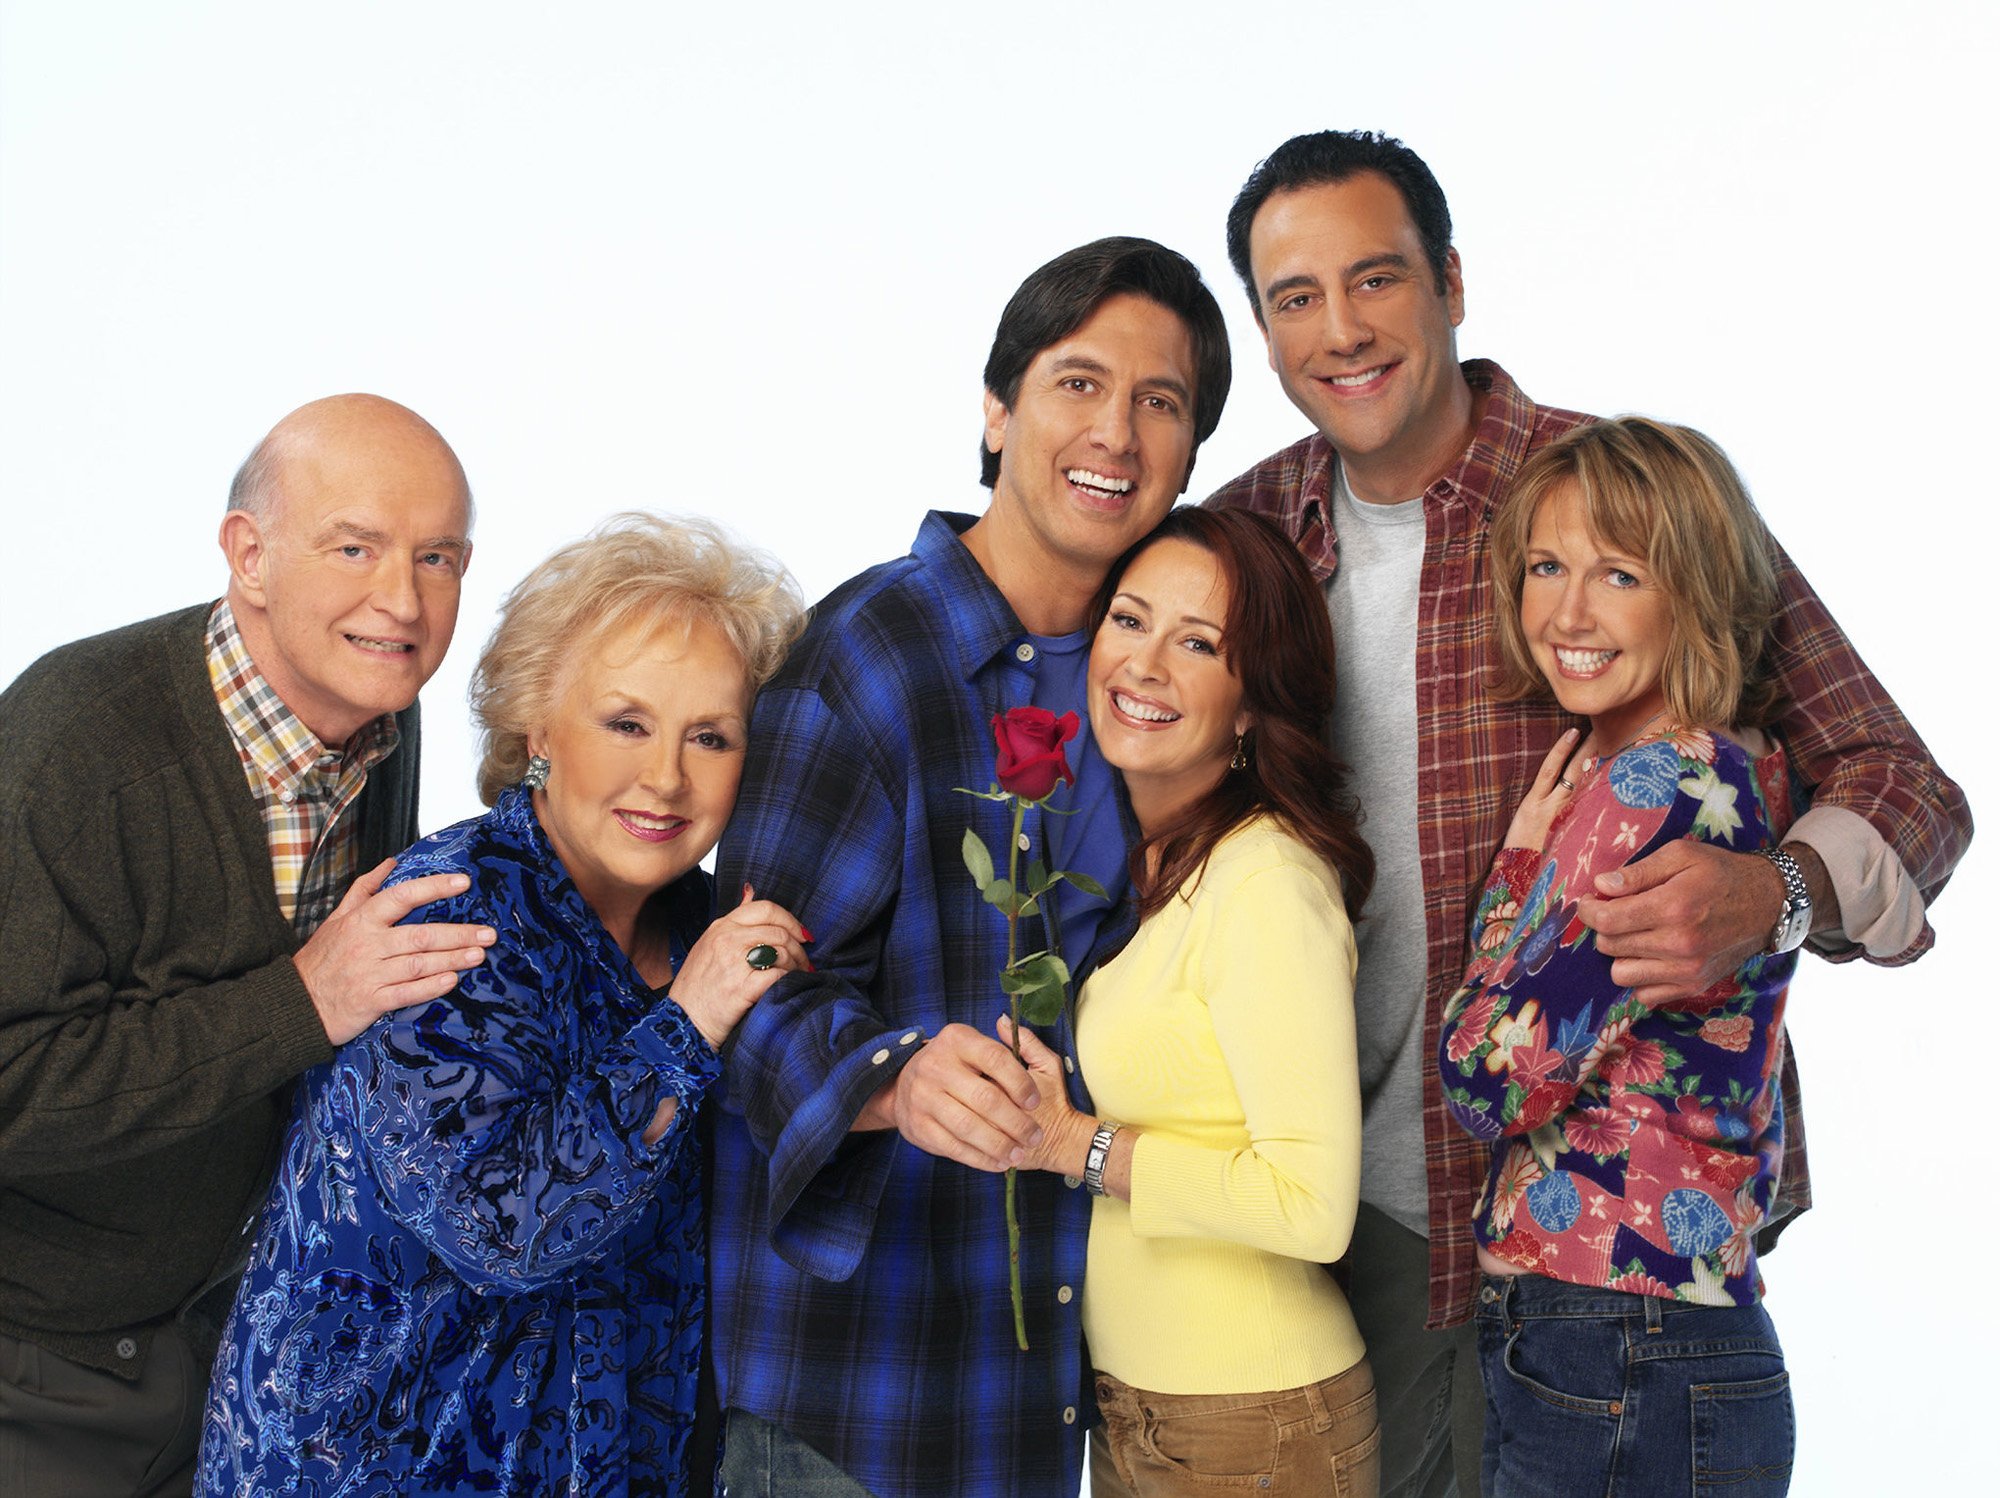 Peter Boyle, Doris Roberts, Ray Romano, Patricia Heaton, Brad Garrett, and Monica Horan pose for promotional photos ahead of the release of Everybody Loves Raymond episodes